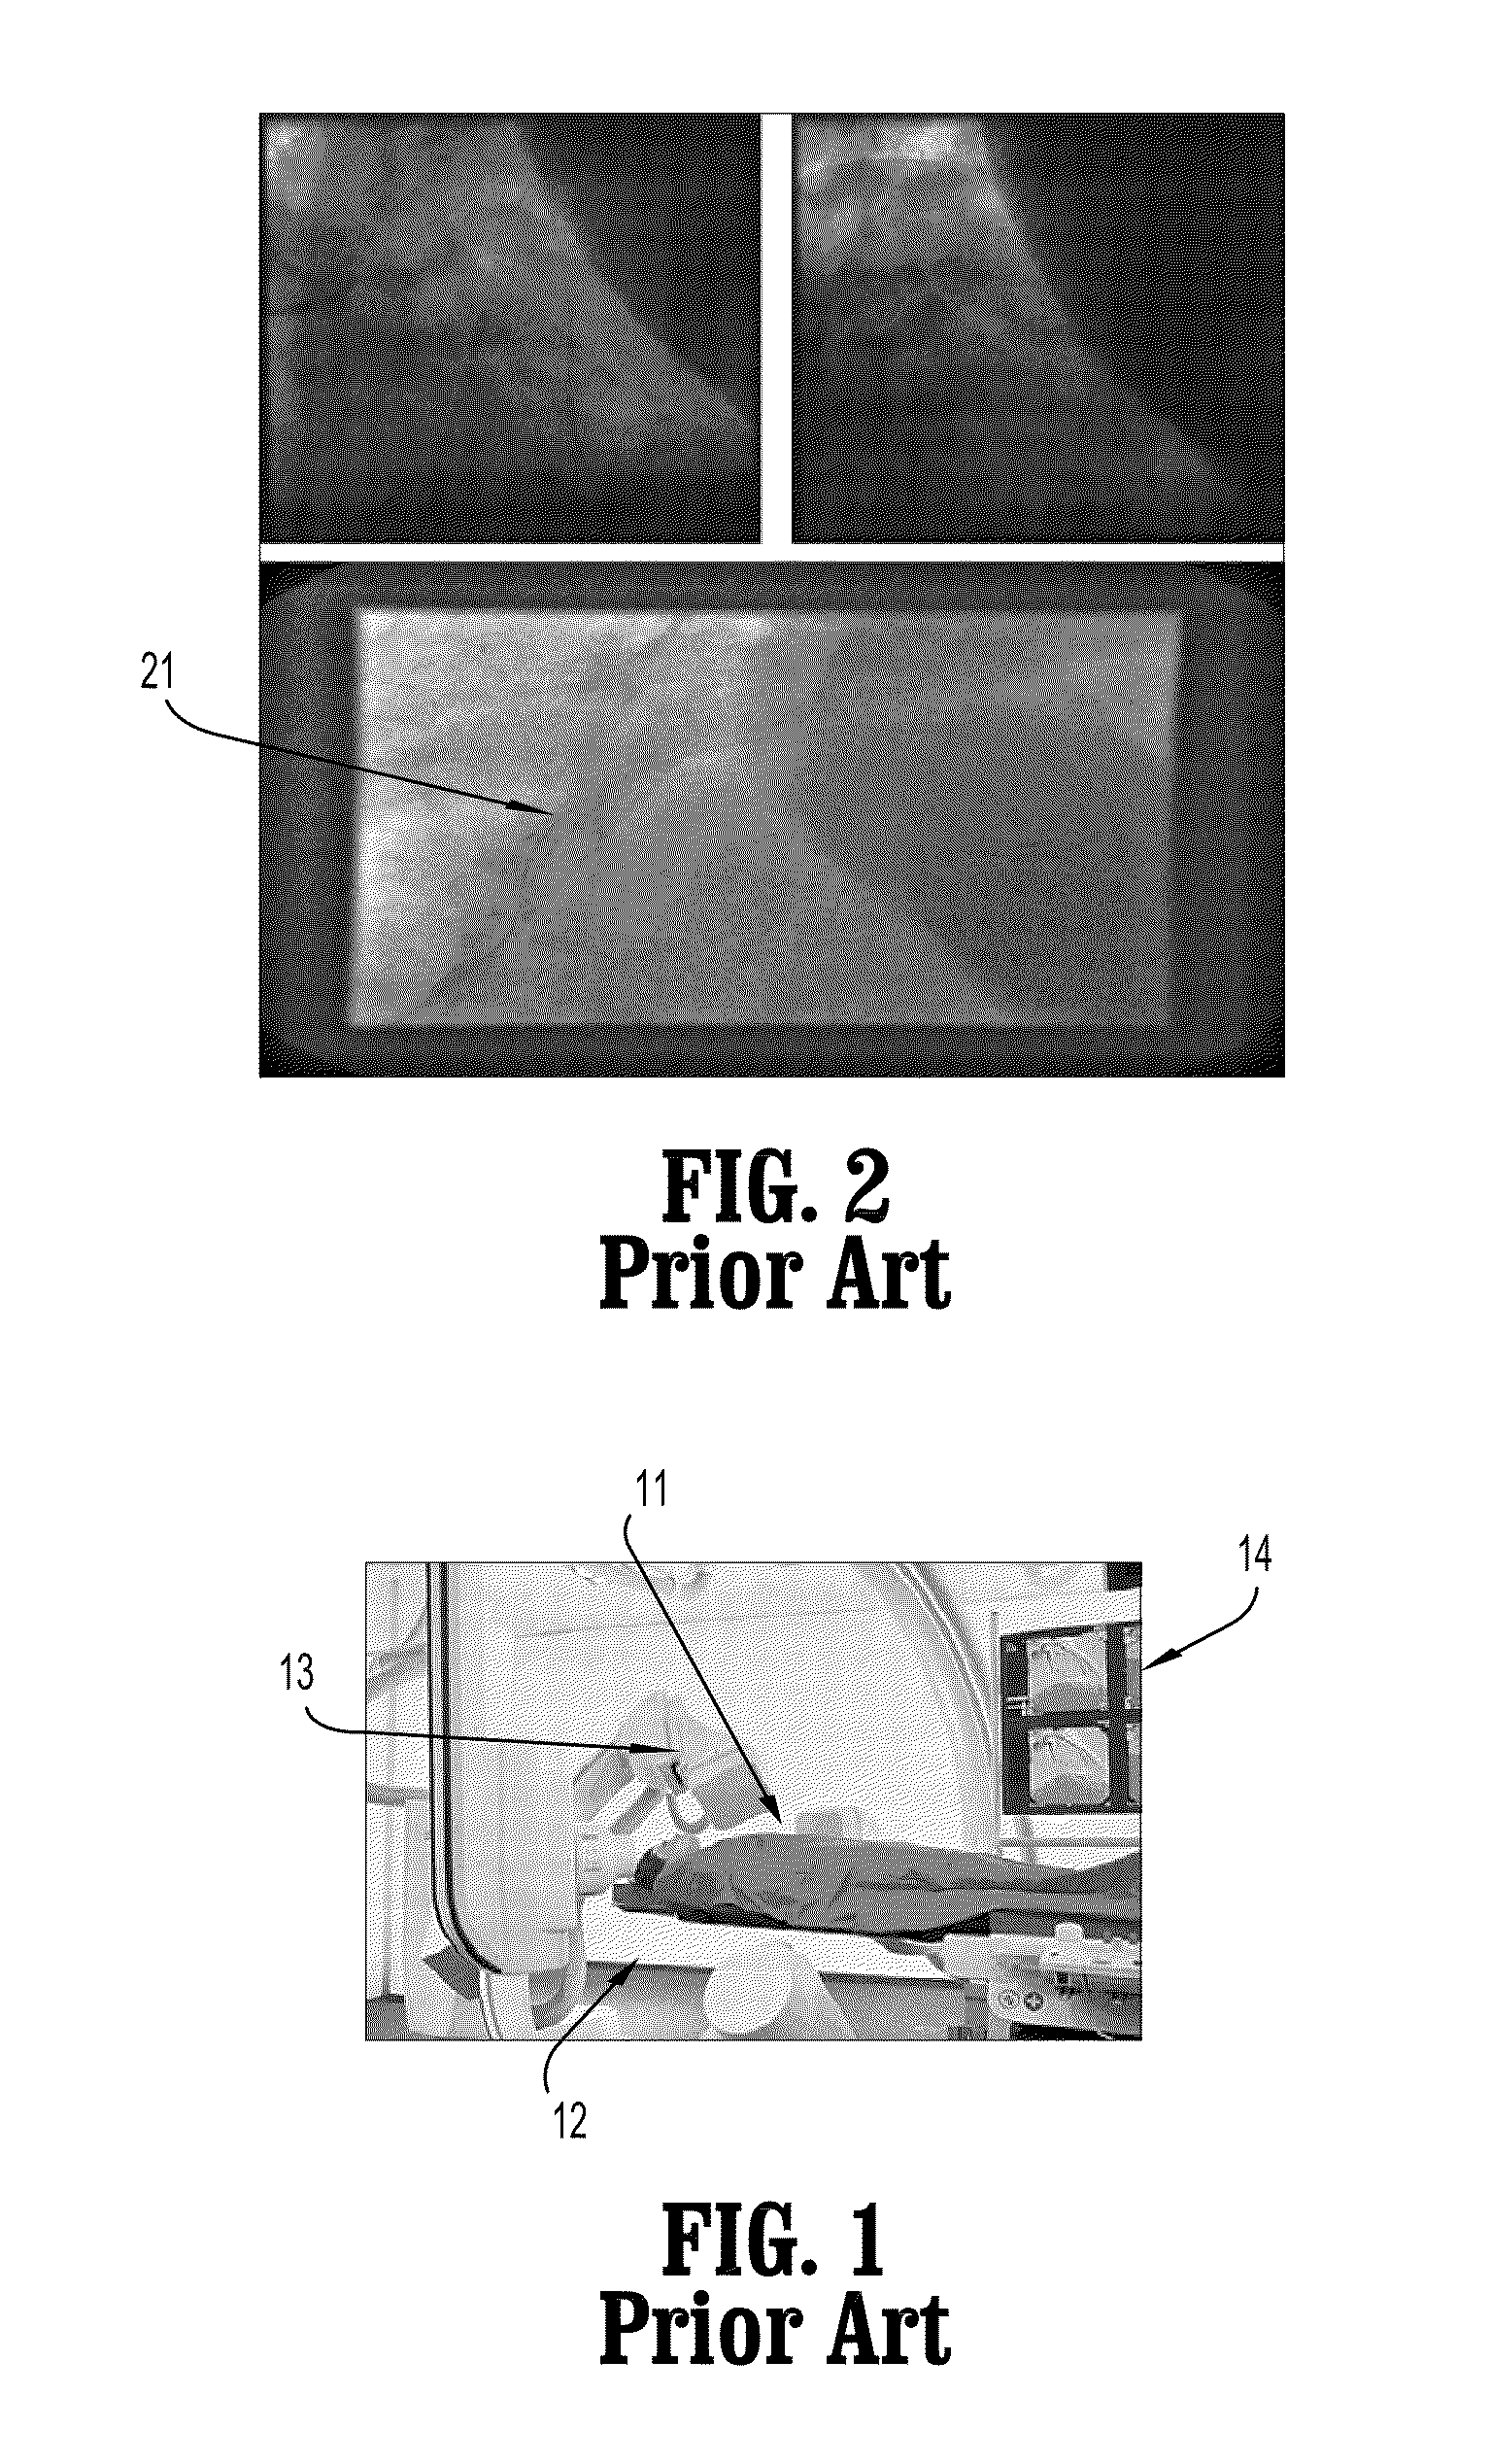 System and method for simultaneously subsampling fluoroscopic images and enhancing guidewire visibility